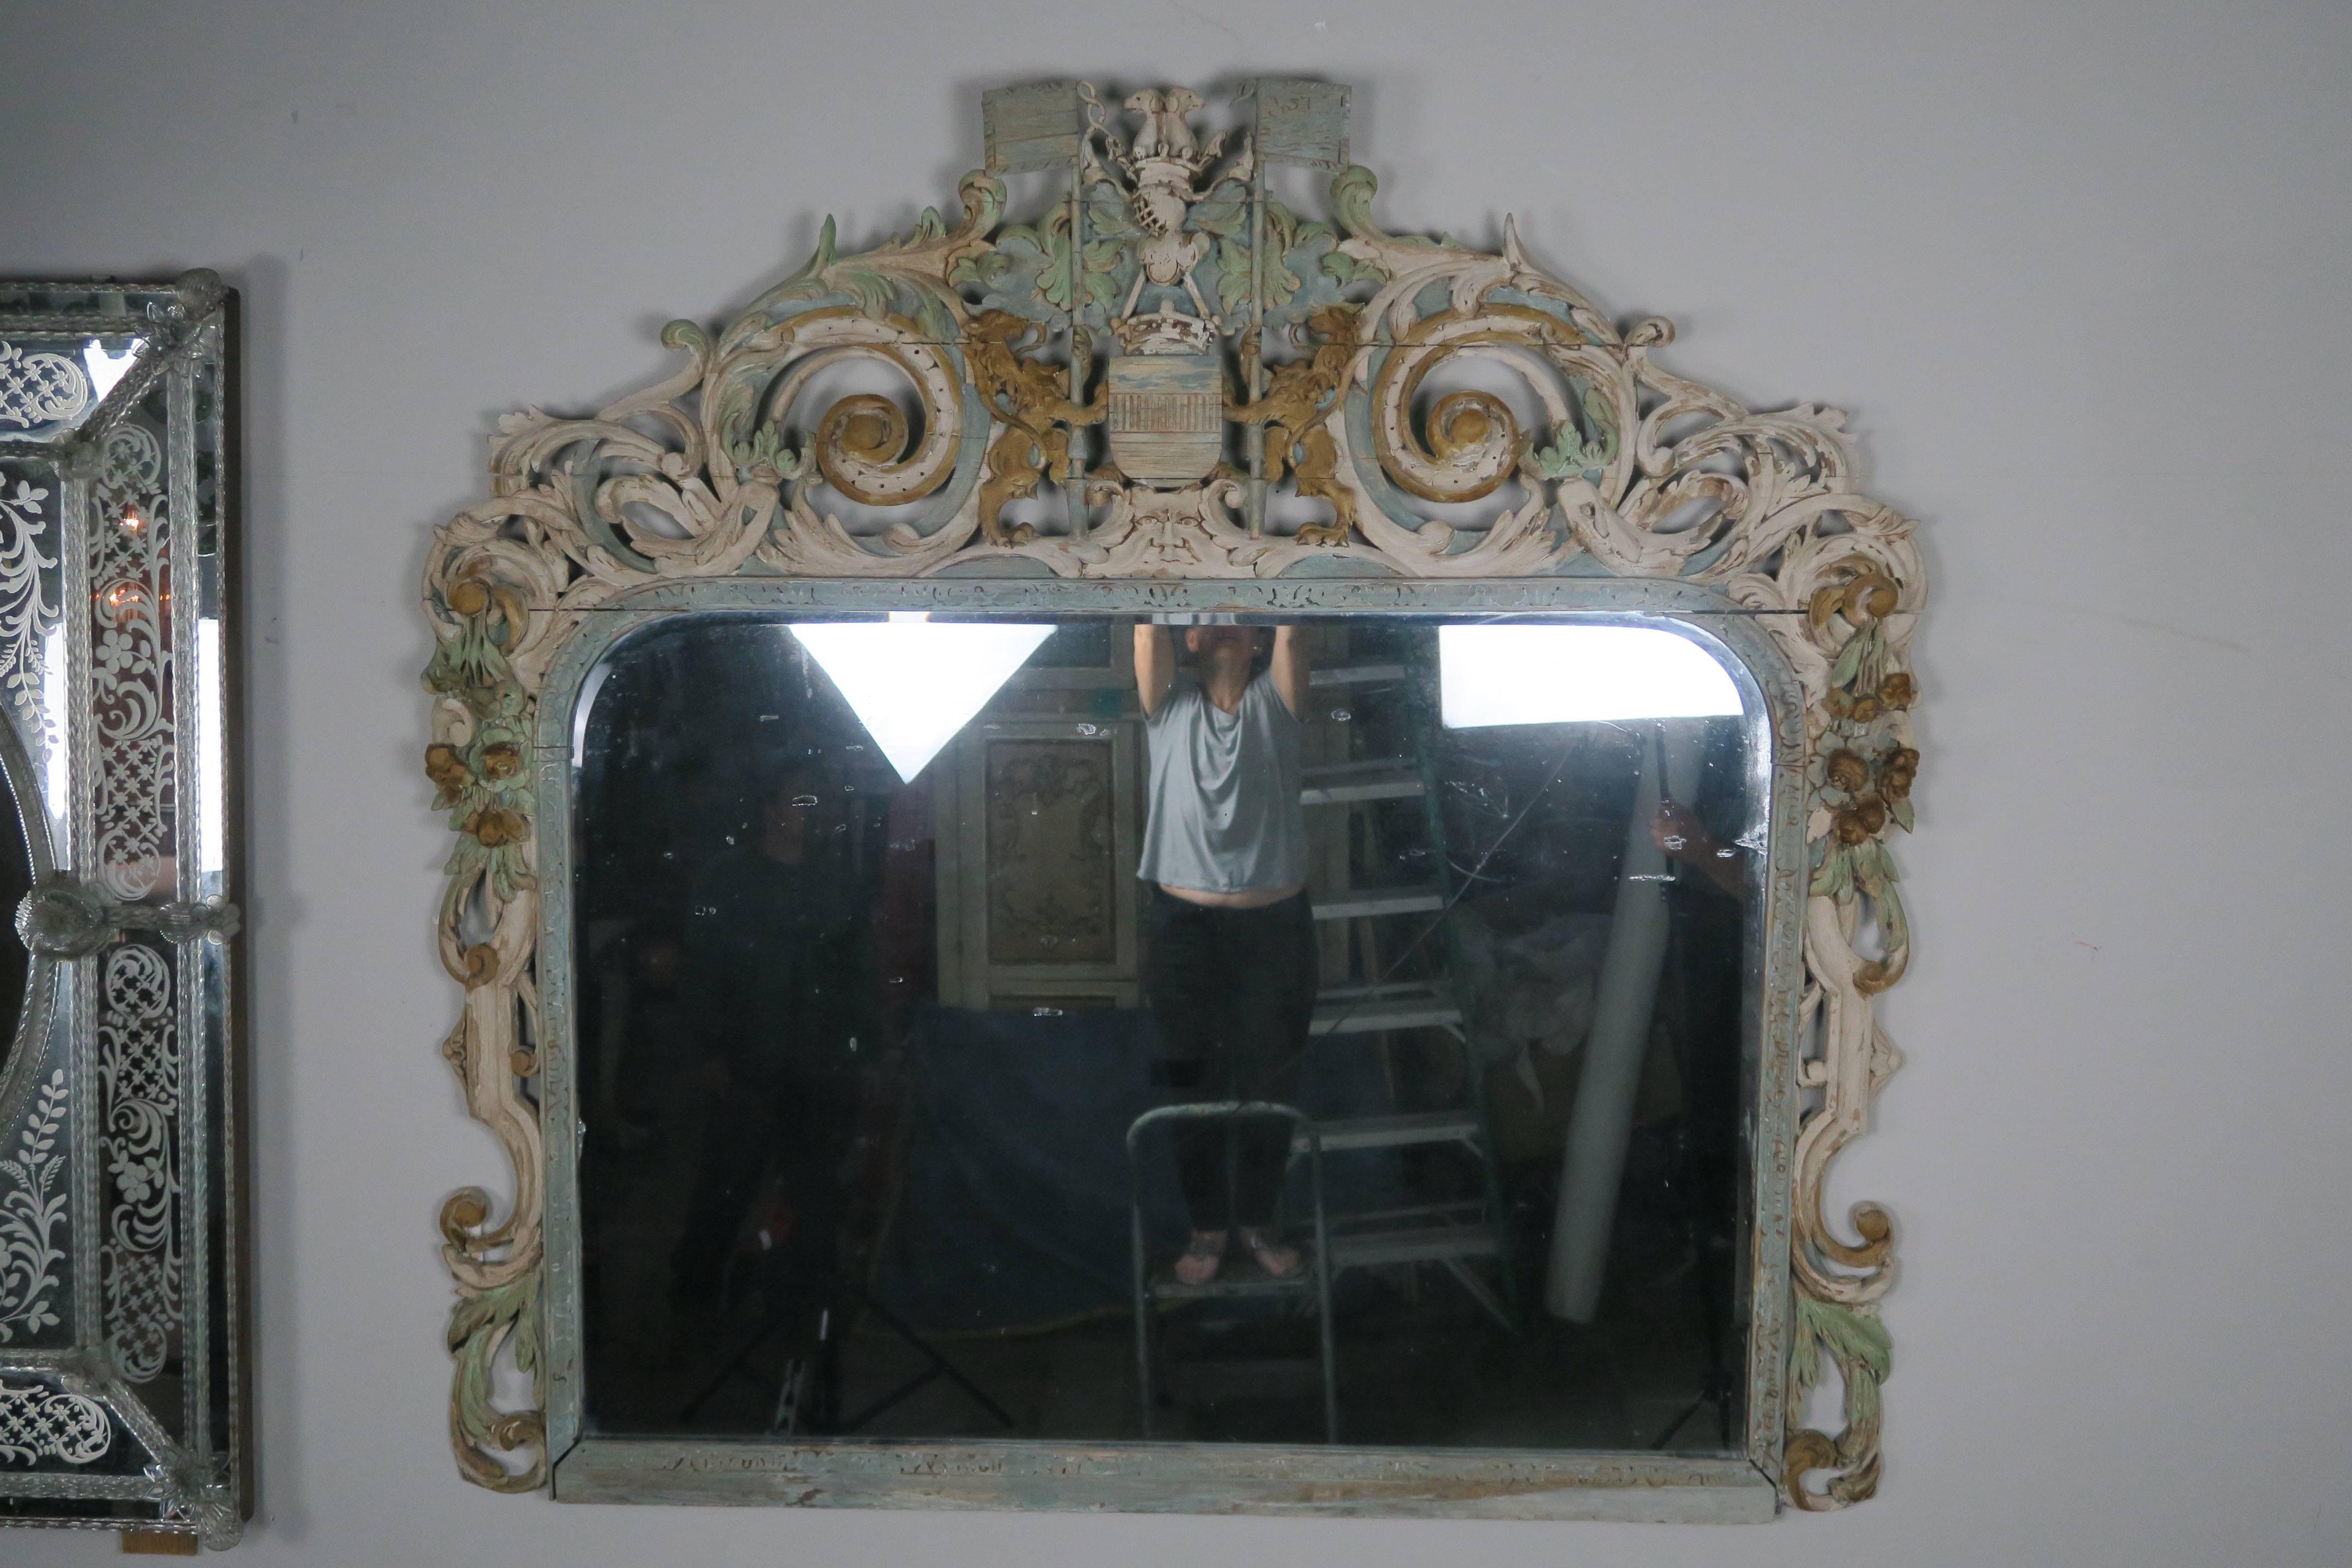 19th century English carved painted mirror with a pair of lions holding a coat of arms and surrounded by swirling acanthus leaves and carved flowers throughout.